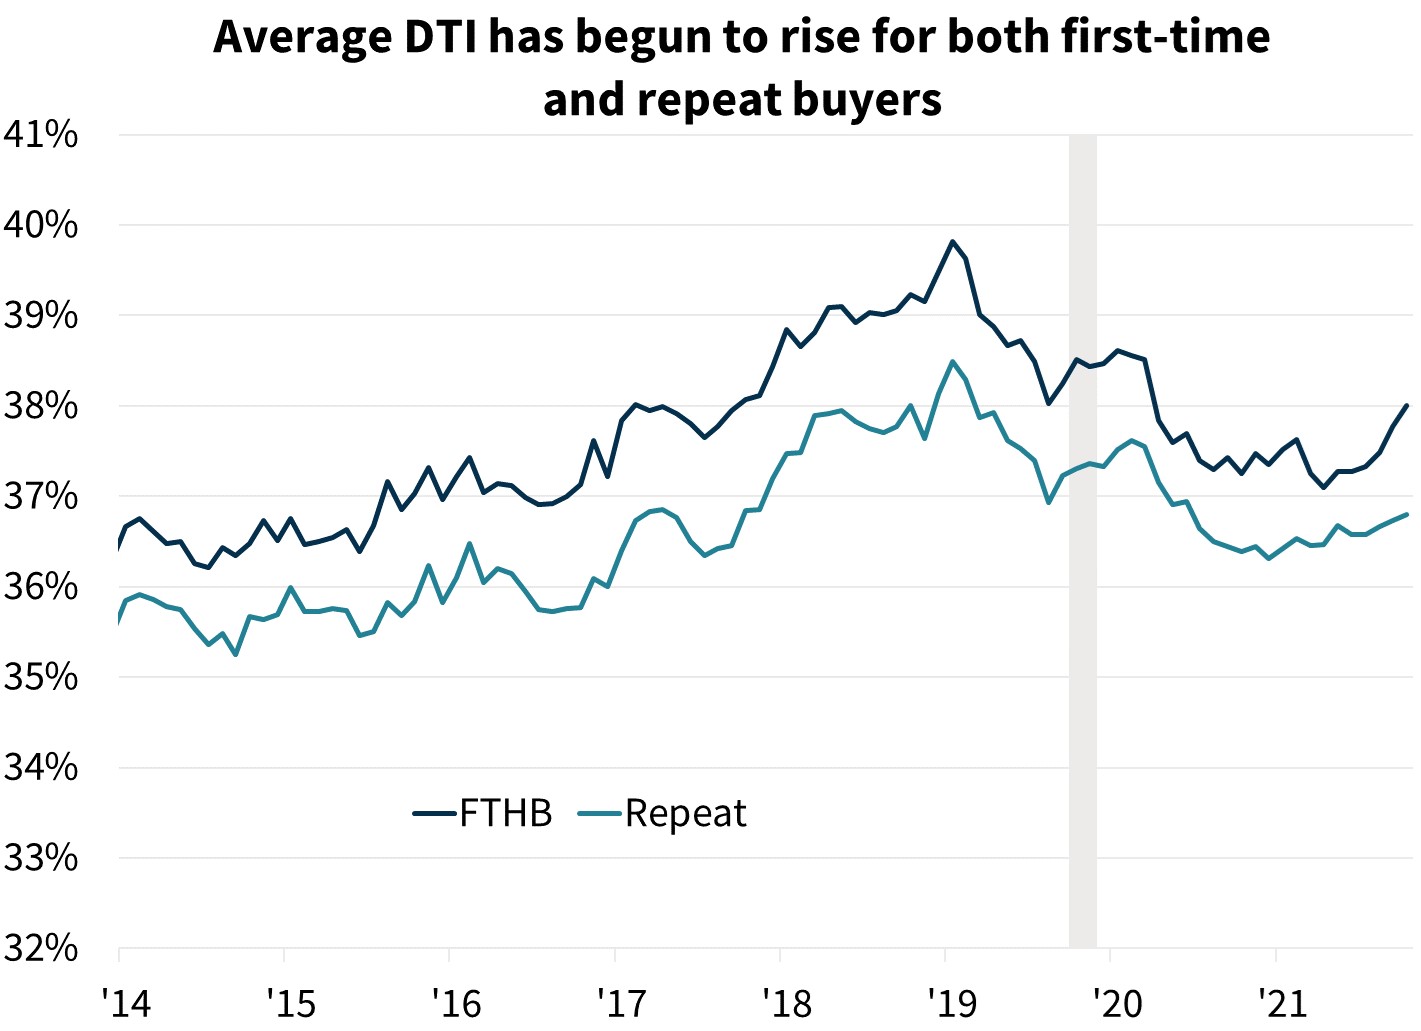  Average DTI has begun to rise for both first time and repeat buyers